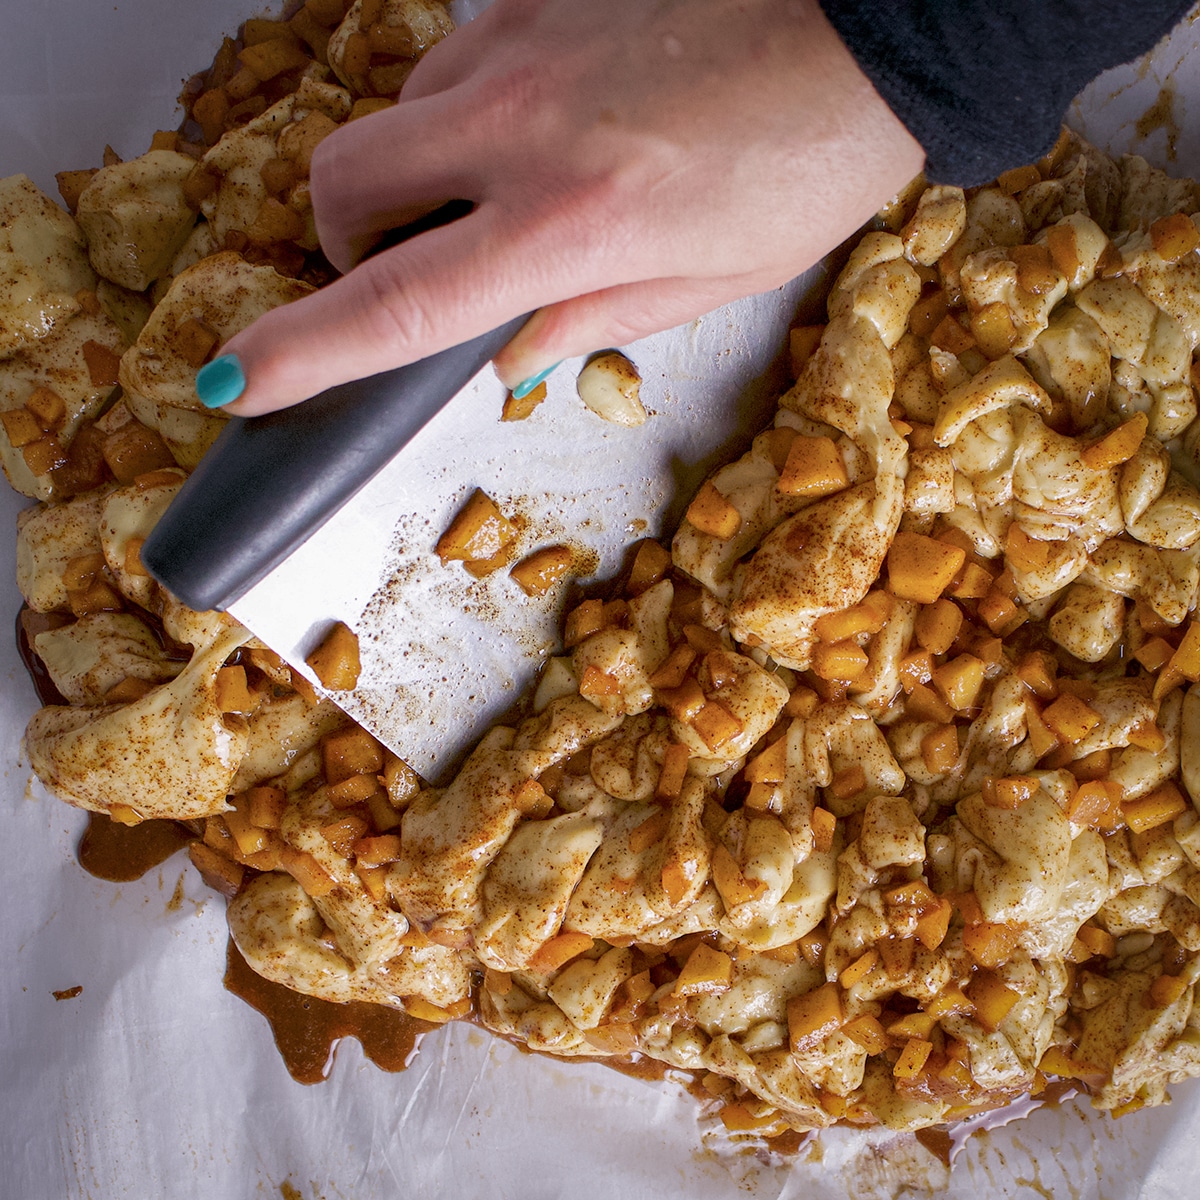 Someone using a dough scraper to chop pieces of apple fritter dough into many small pieces.